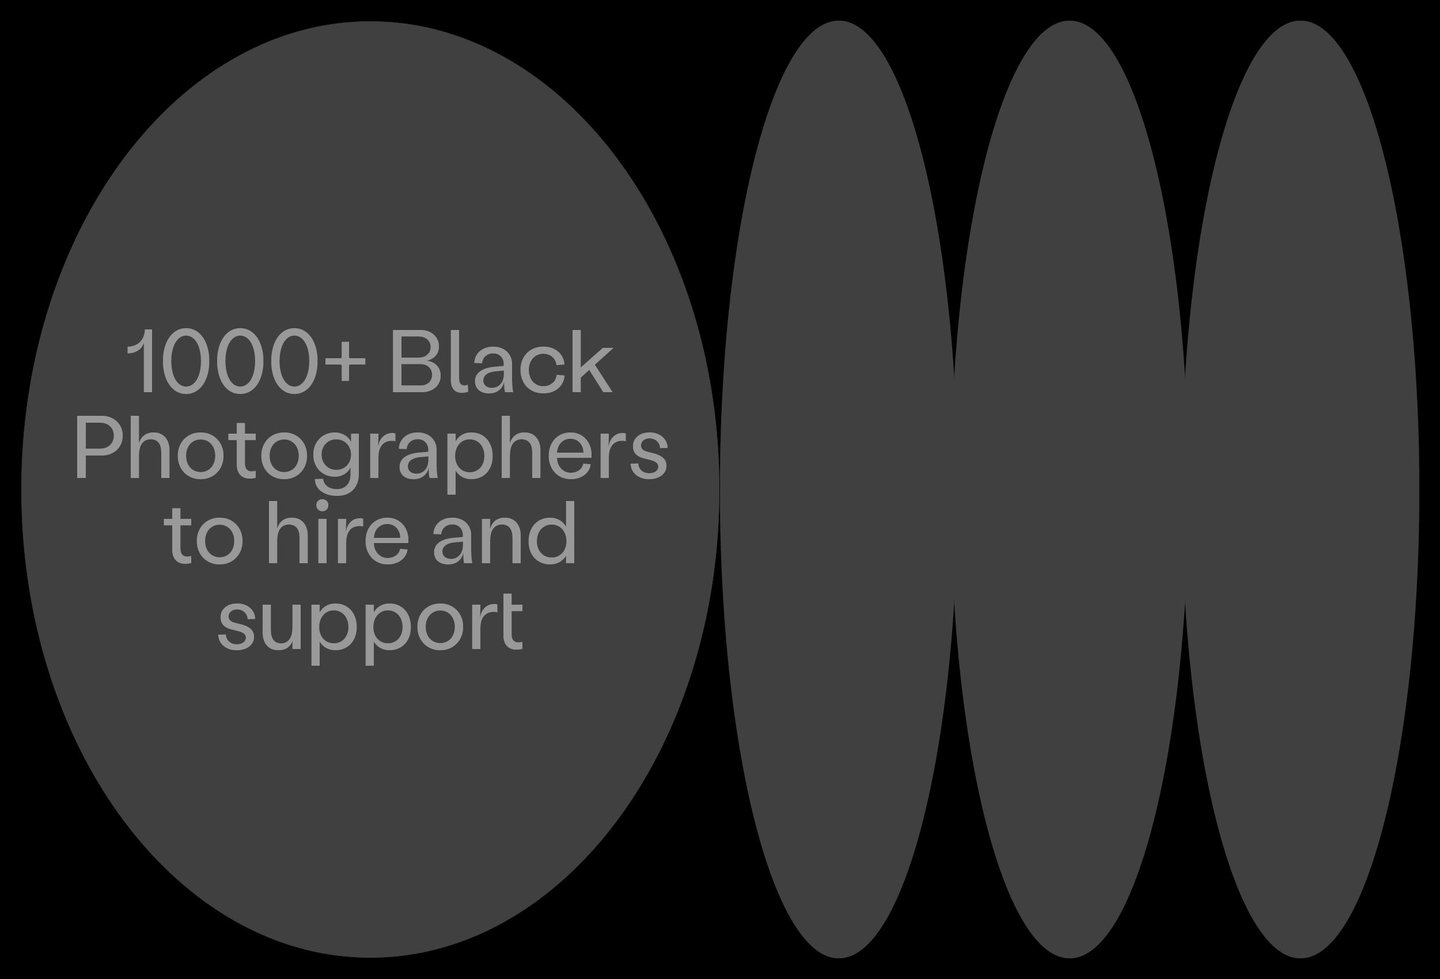 Over 1000 Black photographers to hire, commission, follow and support